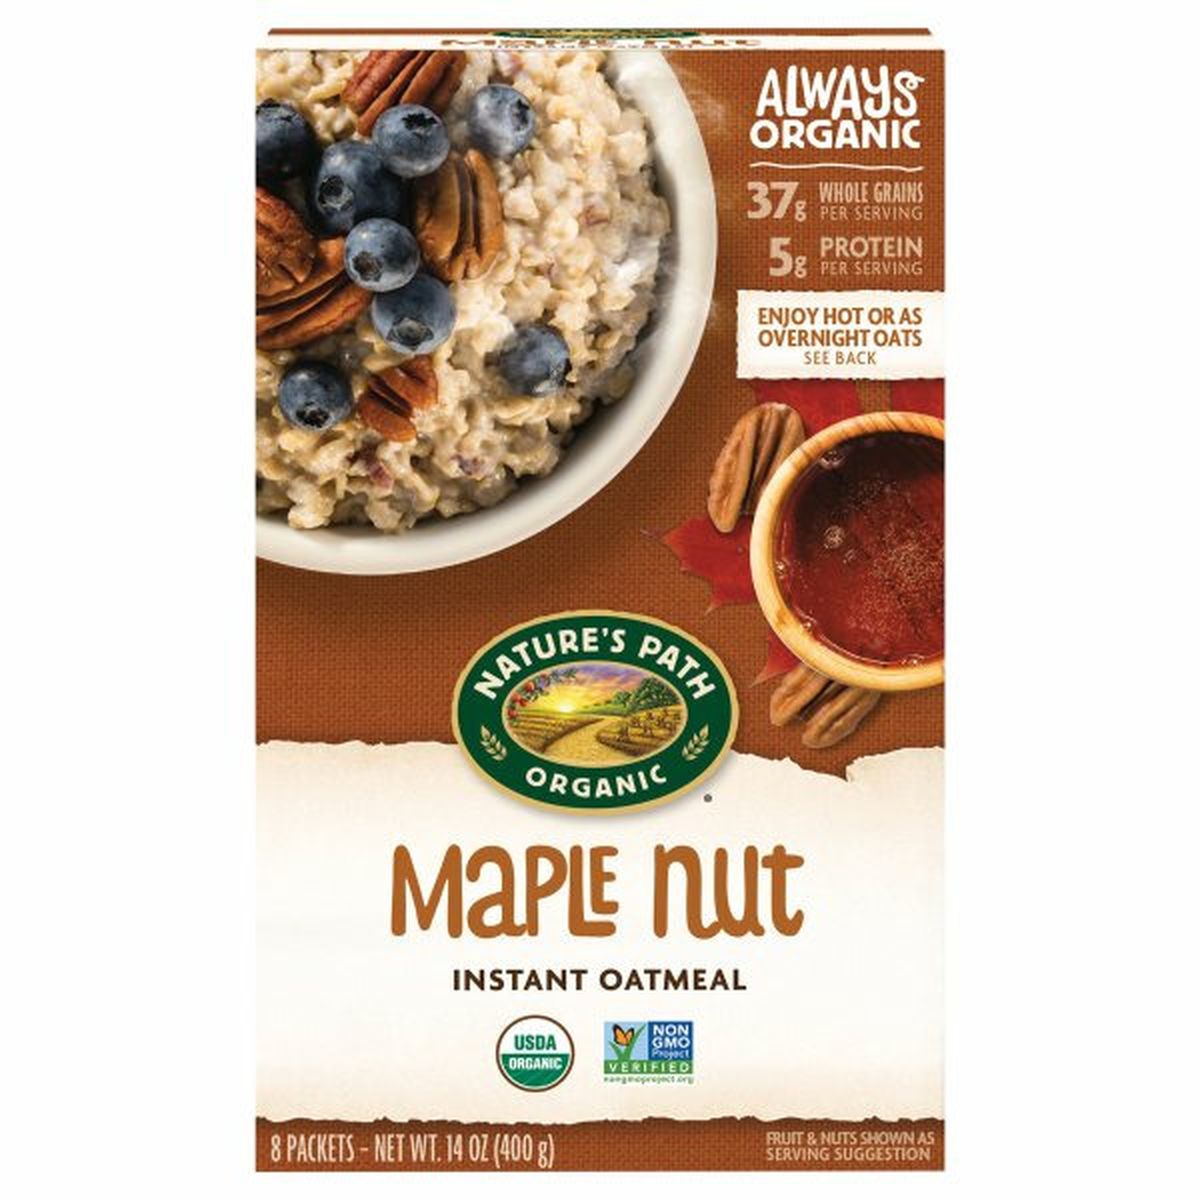 Calories in Nature's Path Instant Oatmeal, Maple Nut